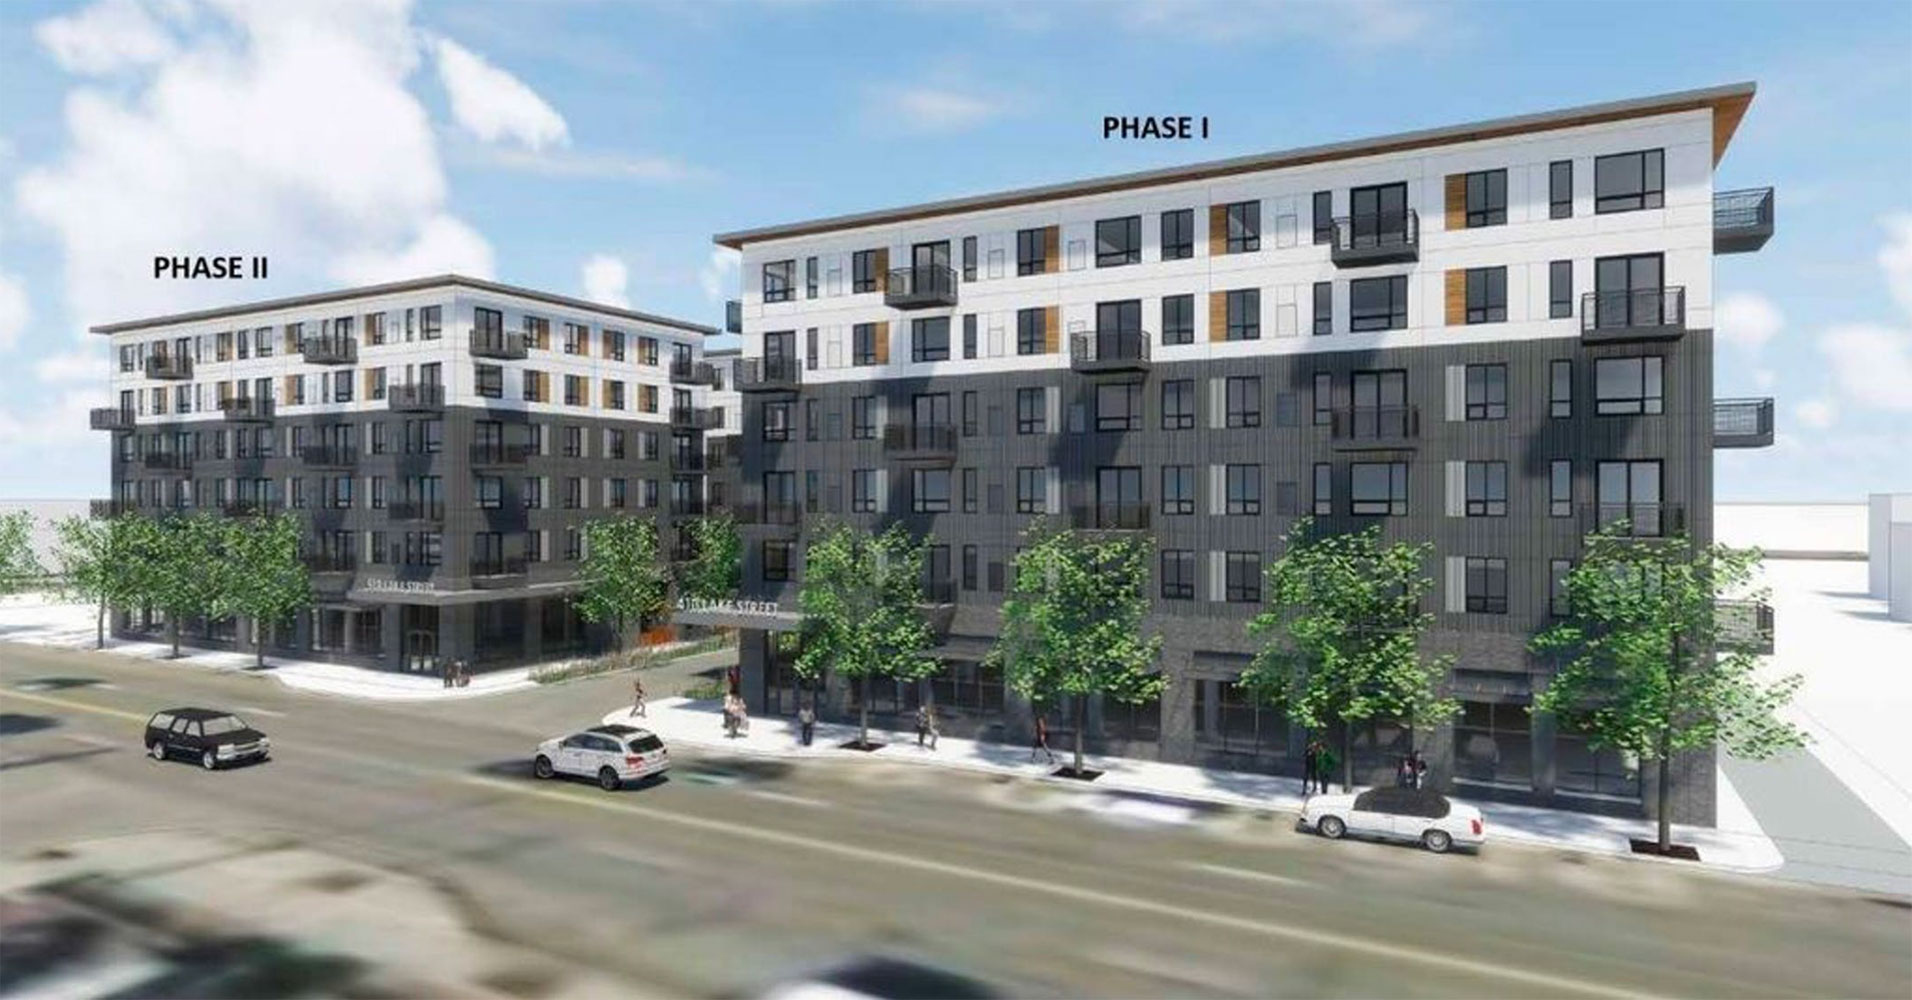 Affordable apartments proposed for Lyn-Lake area of Minneapolis